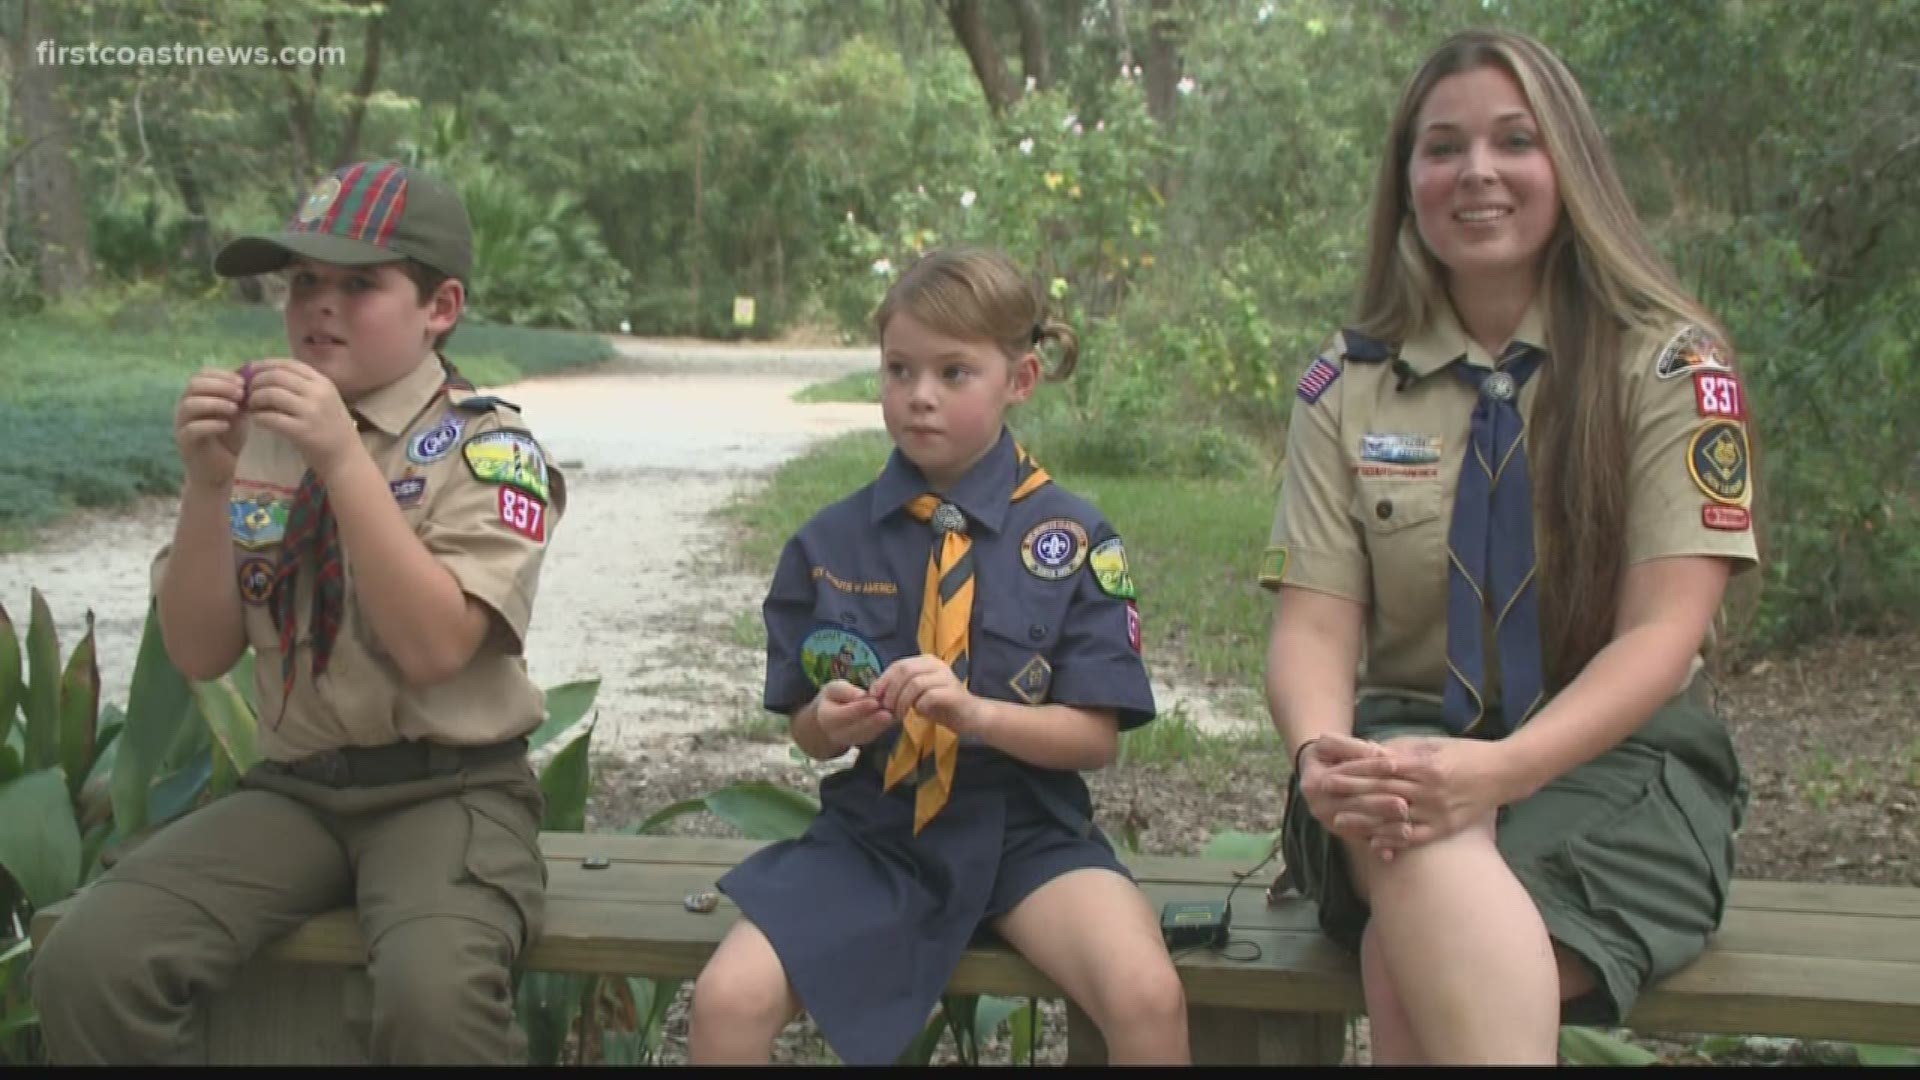 A Jacksonville mom is proud that her daughter will join her brother in Boy Scouts. 